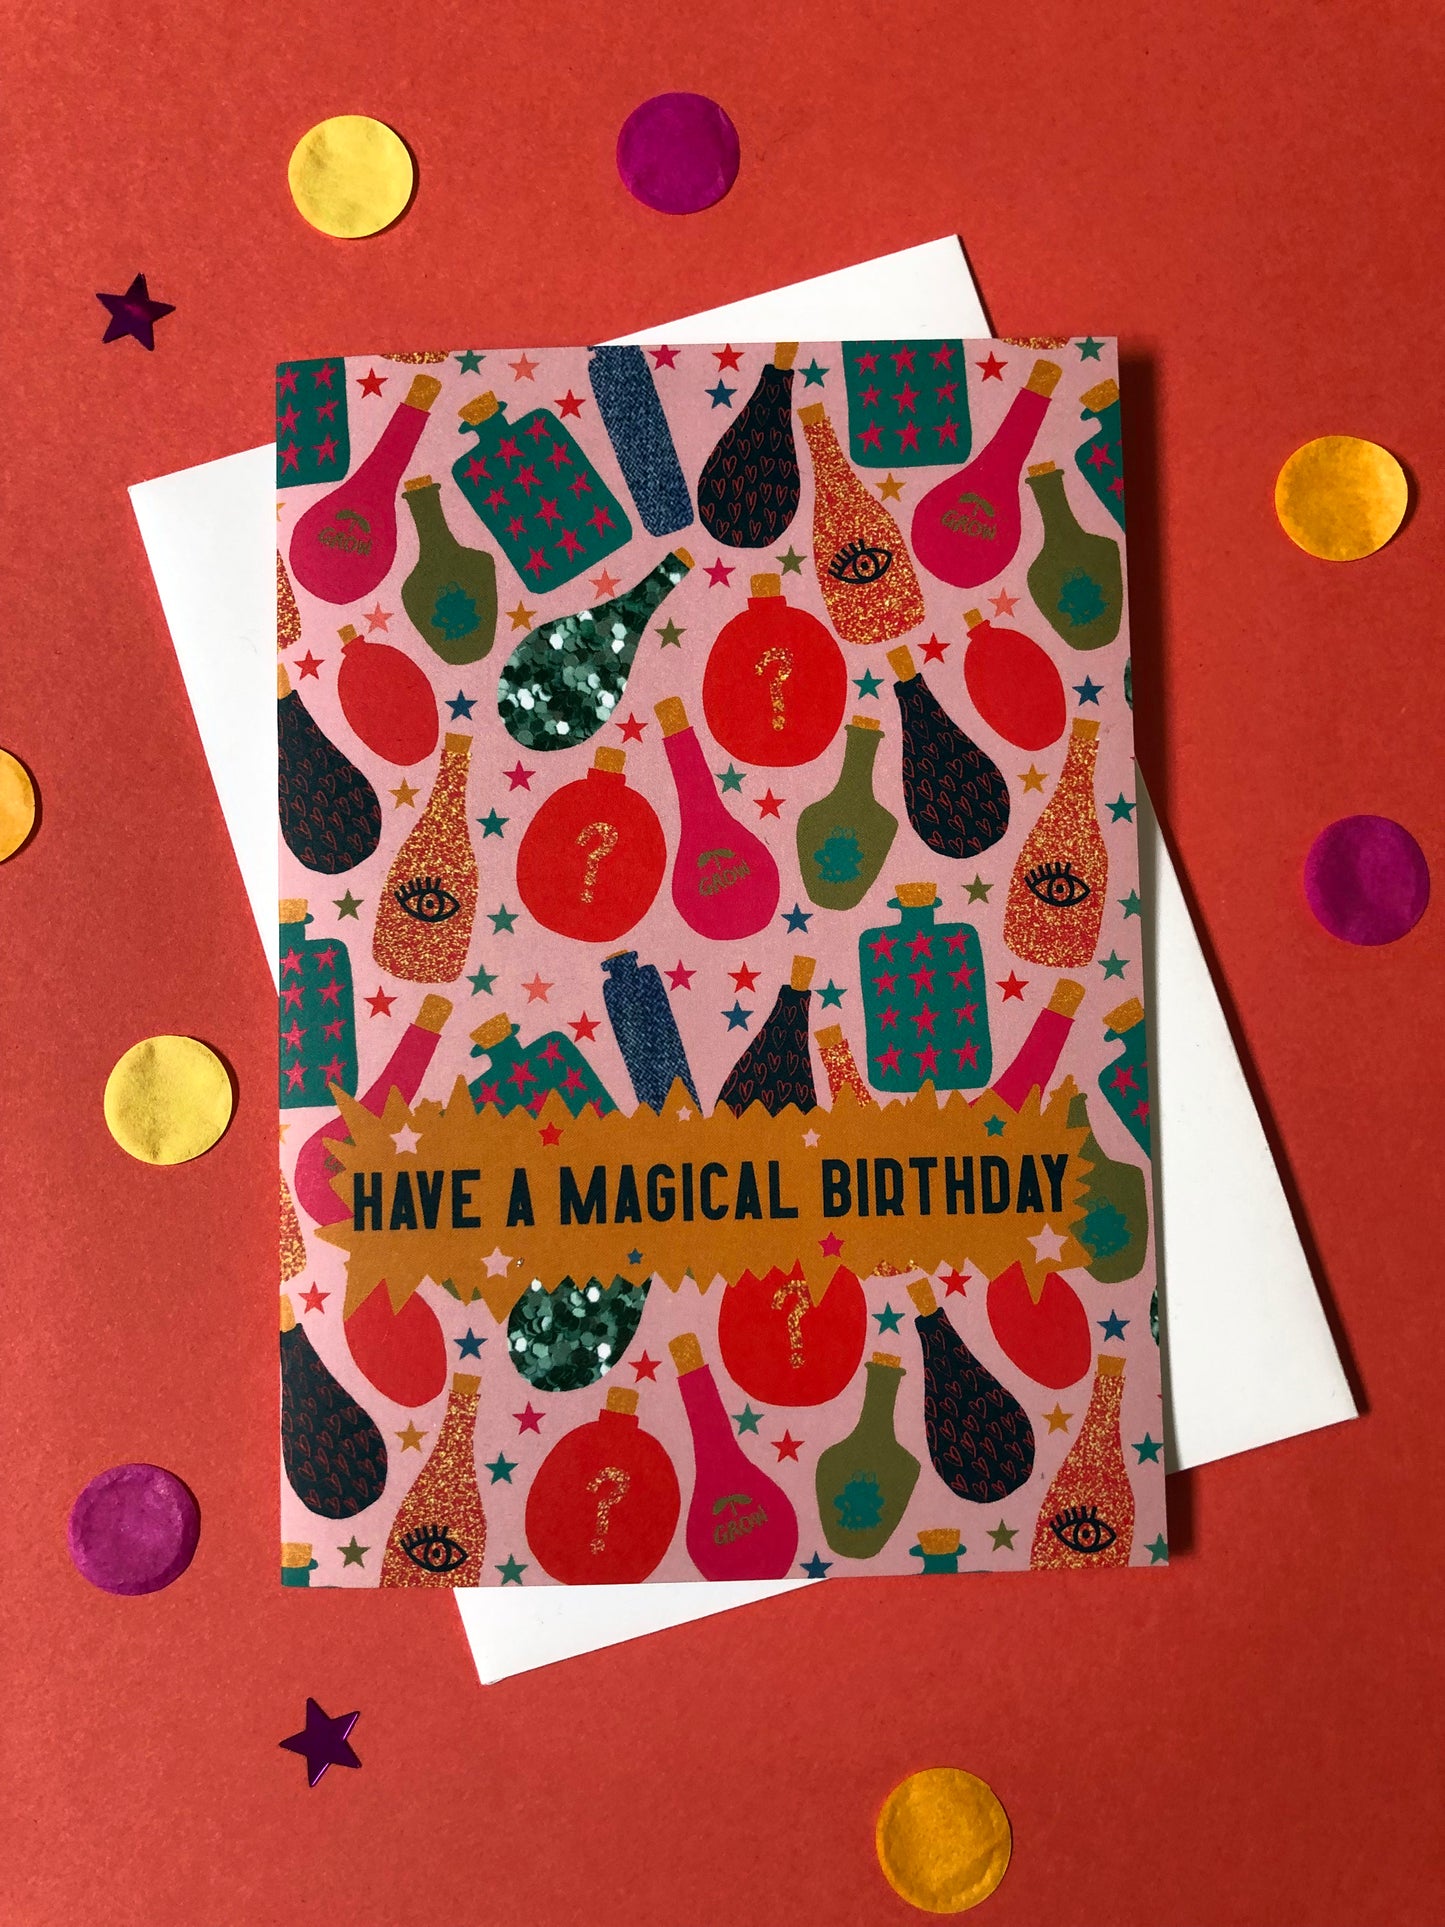 Fun, magical birthday card with colourful magic potion designs on a red background.